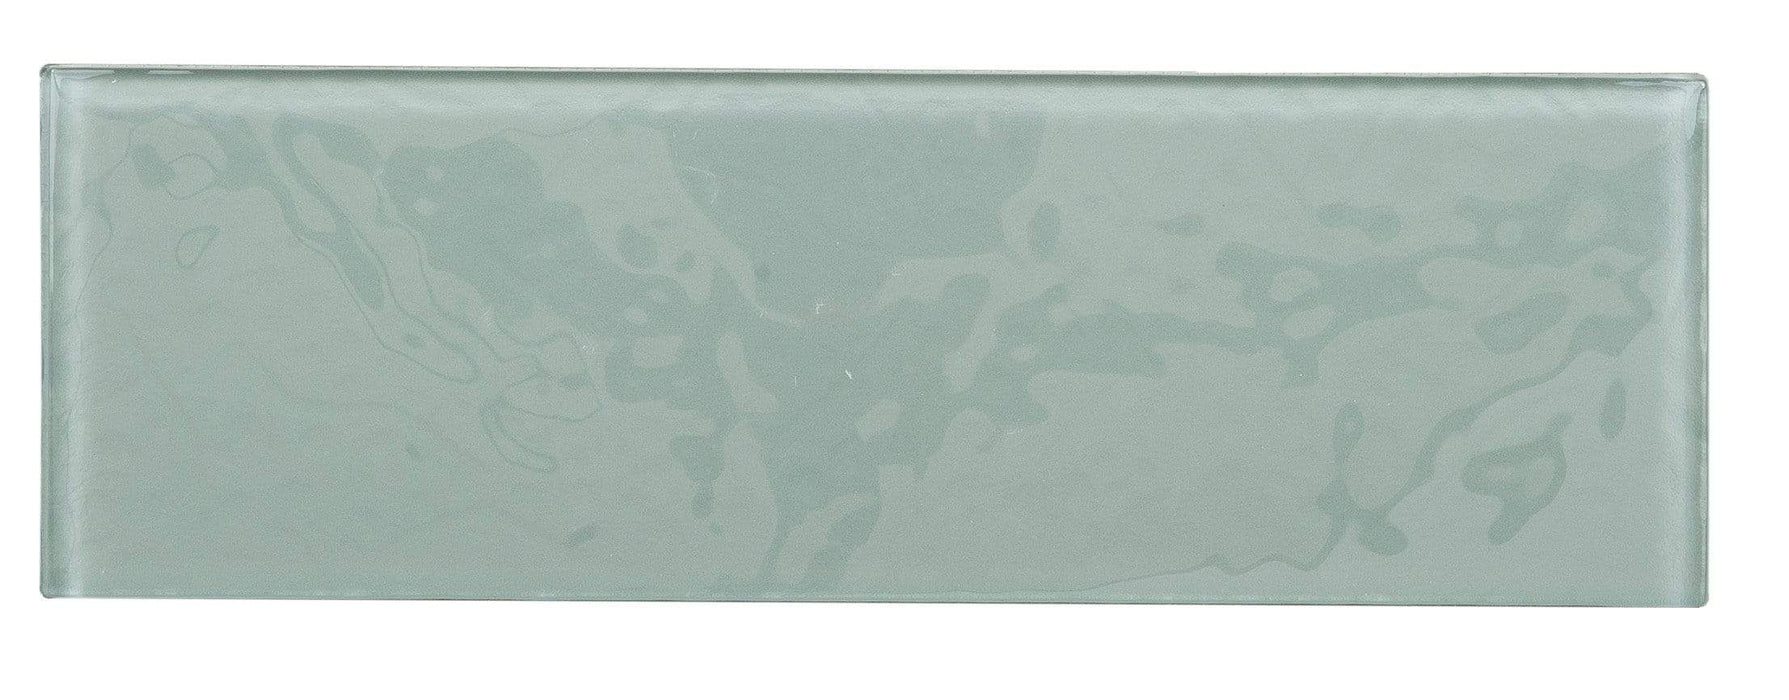 Sweet Pea Soft Texture 4" x 12" Glossy Glass Subway Tile Millenium Products